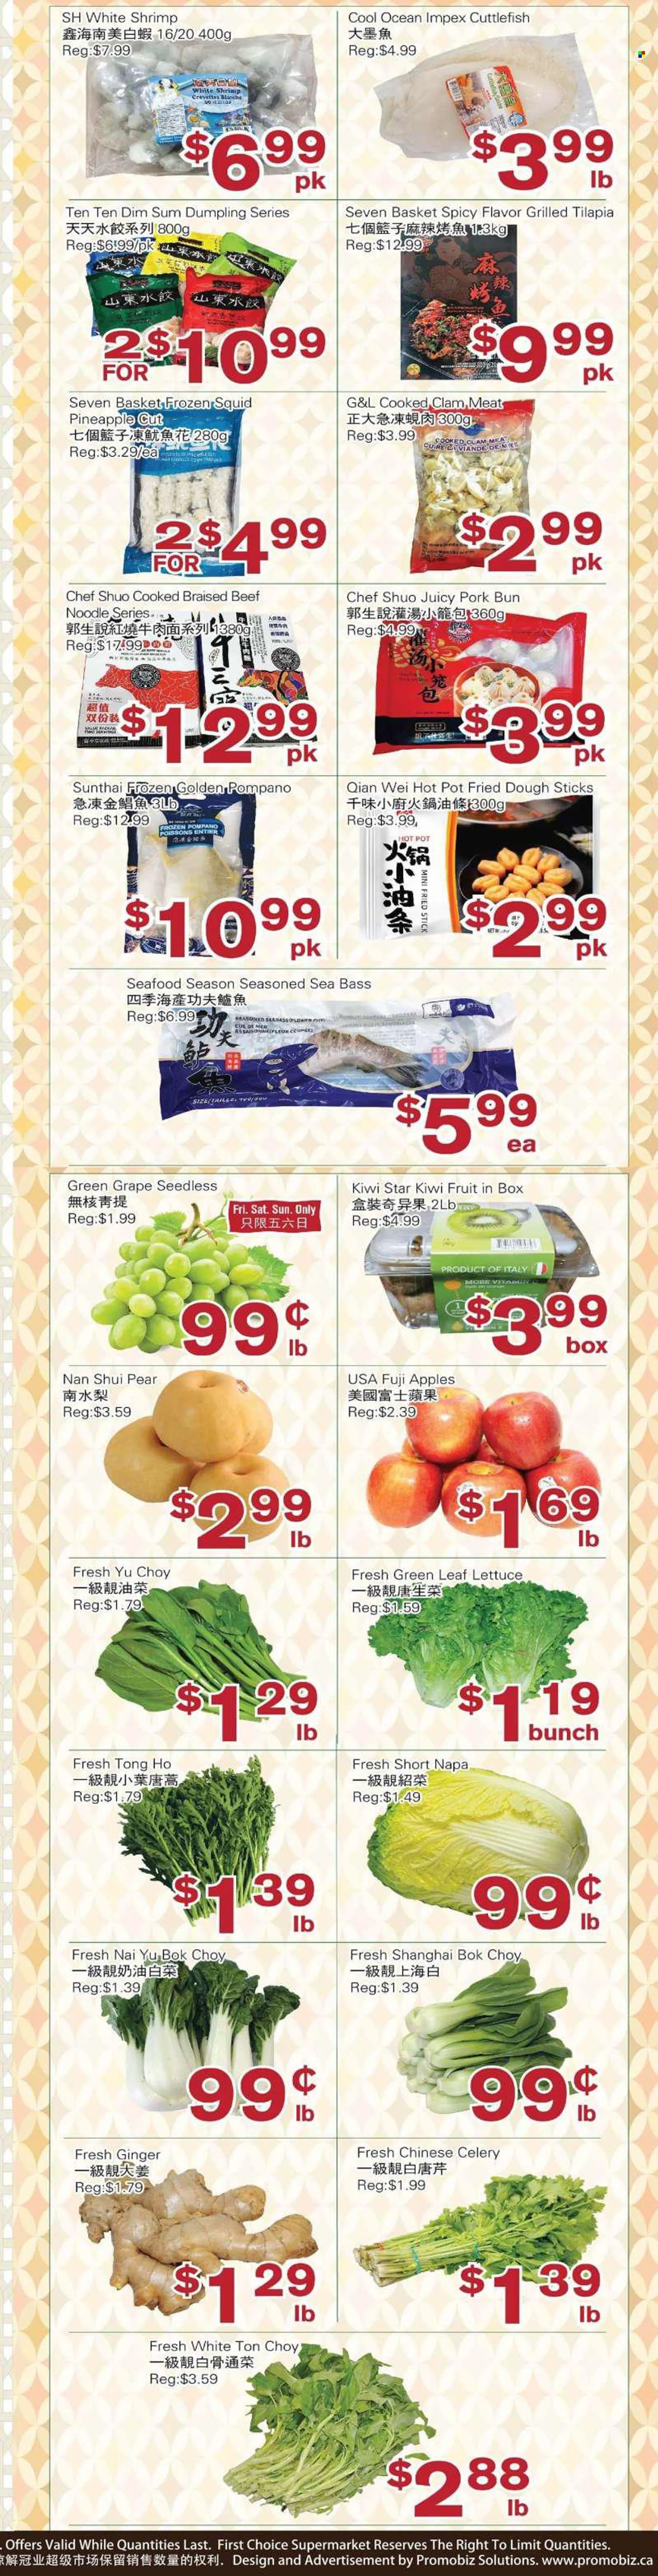 First Choice Supermarket Flyer - June 17, 2022 - June 23, 2022 - Sales products - bok choy, celery, ginger, lettuce, apples, pineapple, pears, Fuji apple, clams, cuttlefish, sea bass, squid, tilapia, pompano, seafood, shrimps, dumpling, noodles, vitamin c